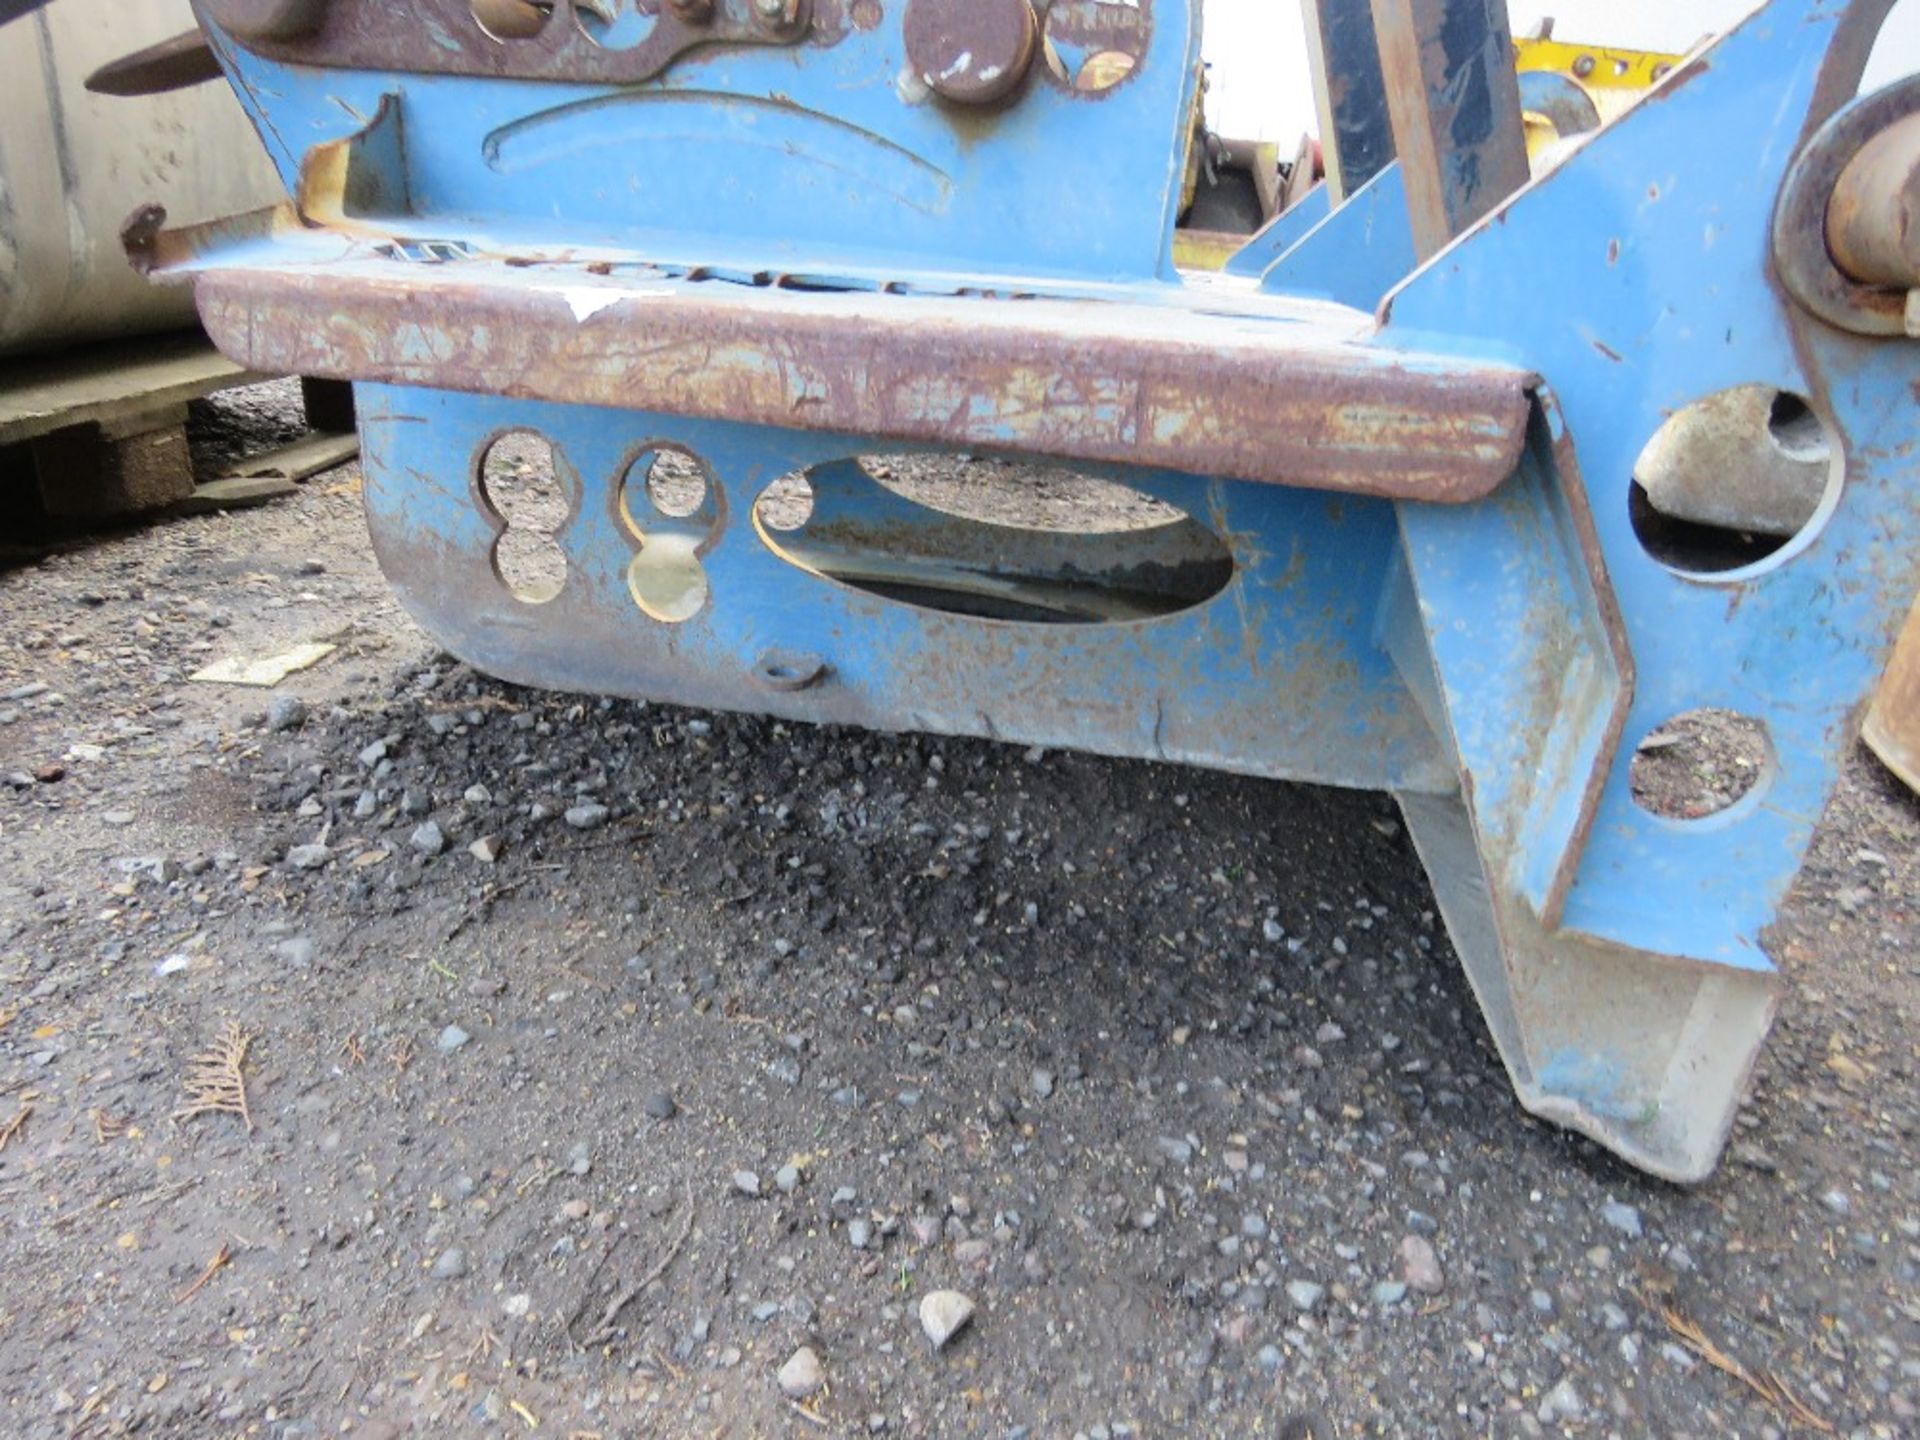 SET OF CONQUIP EXCAVATOR MOUNTED PALLET FORKS. SOURCED FROM COMPANY LIQUIDATION. - Image 3 of 6